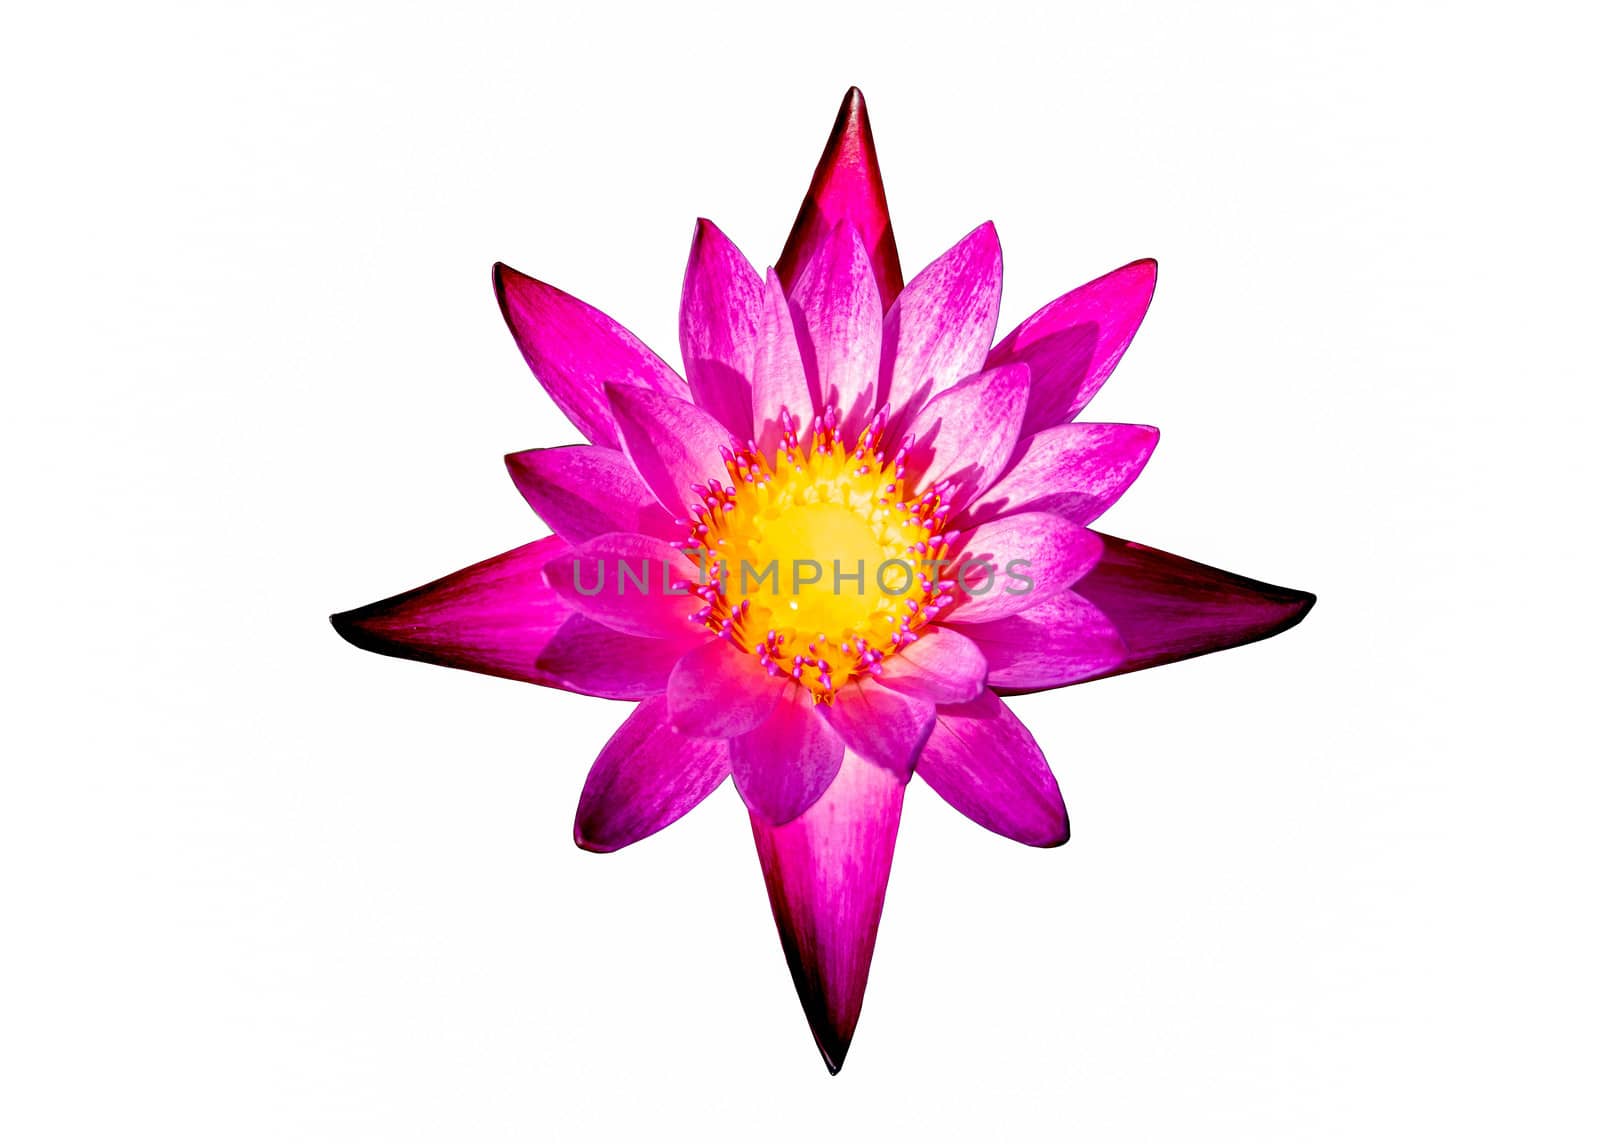 Beautiful pink lotus flower with yellow pollen, isolated on whitBeautiful pink lotus flower with yellow pollen, isolated on white background. by TEERASAK